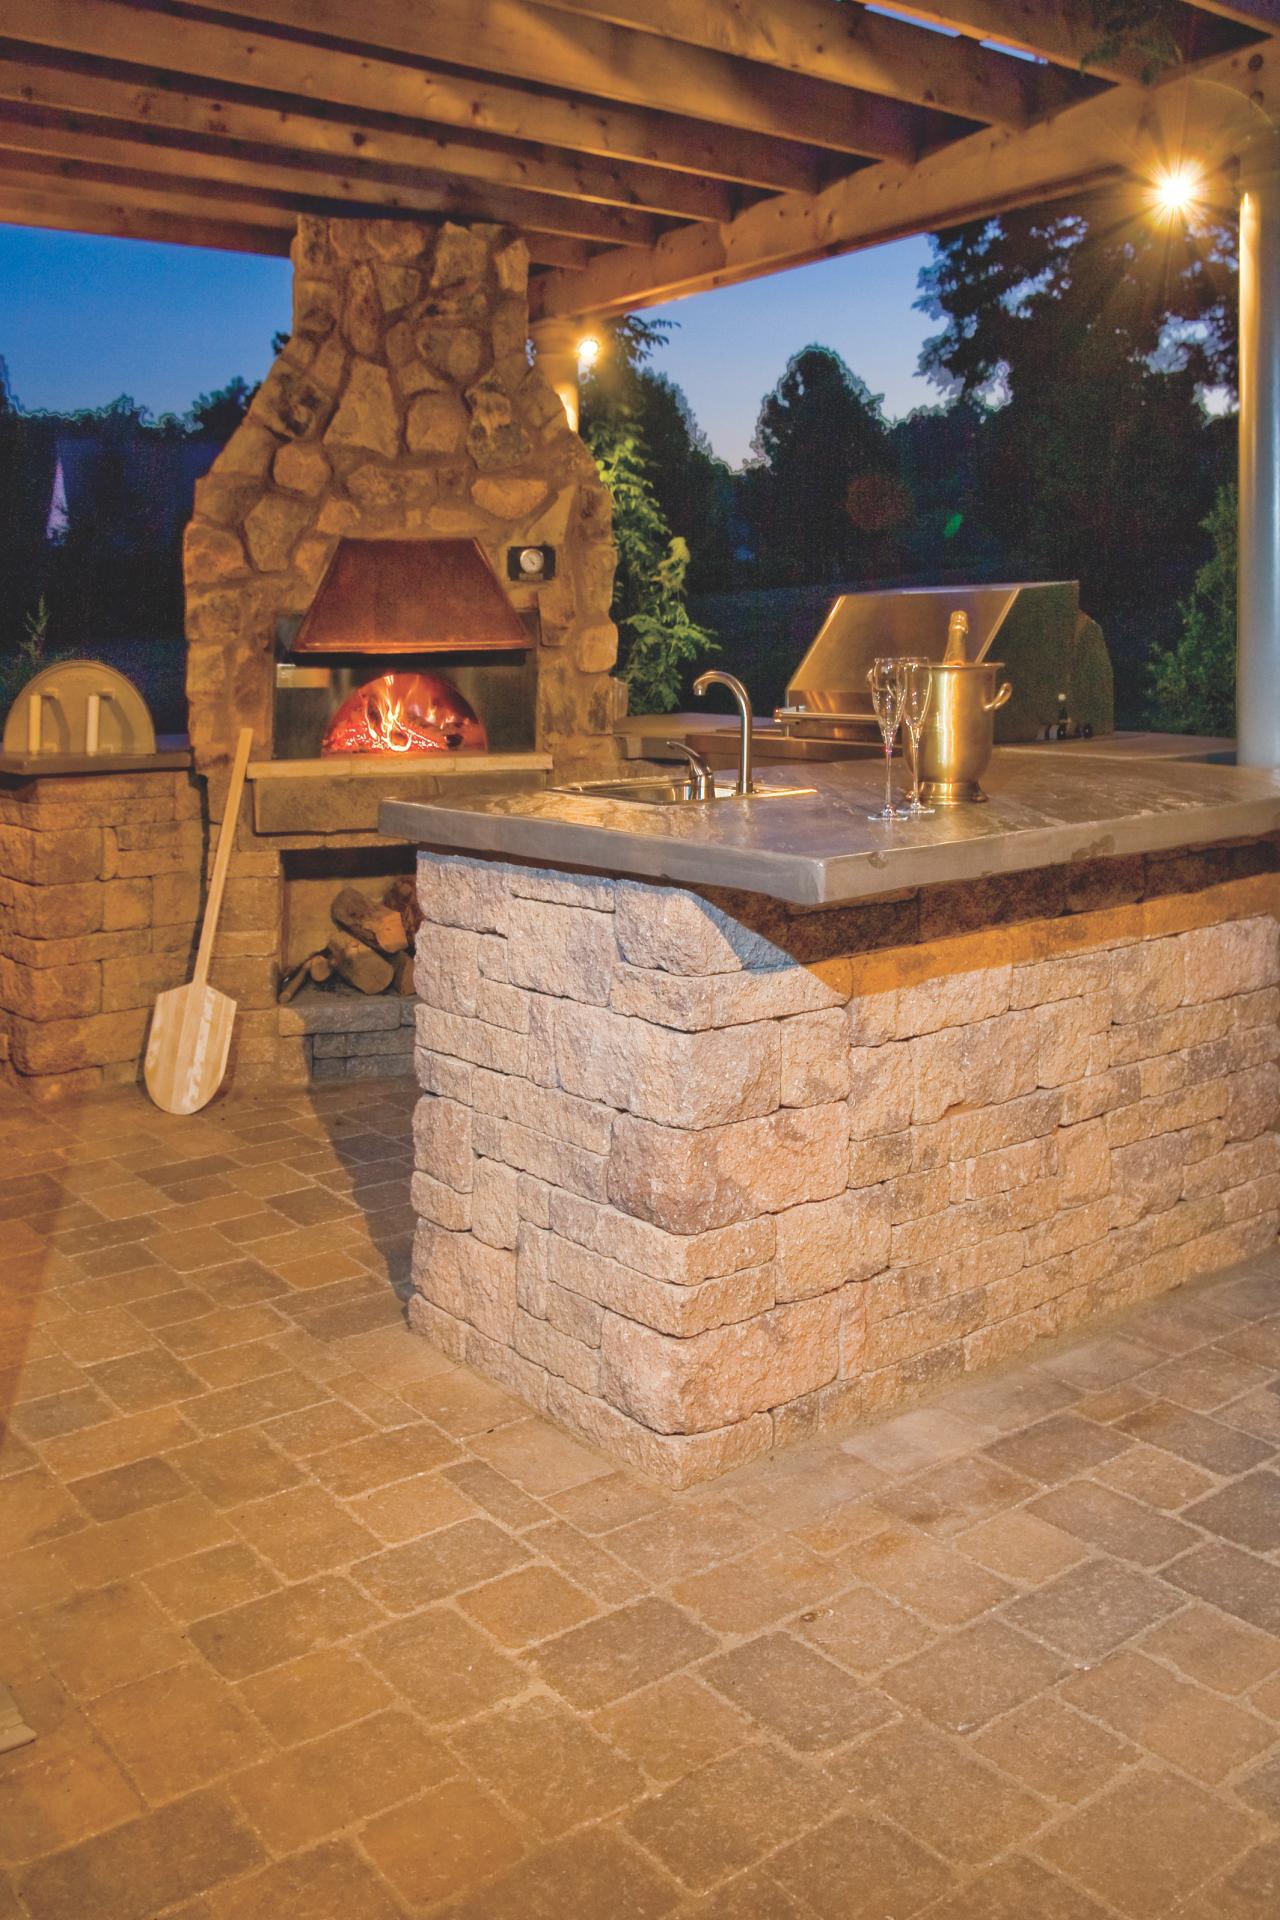 Outdoor Pizza Oven Fireplace Options, How To Build Outdoor Brick Oven Fireplace